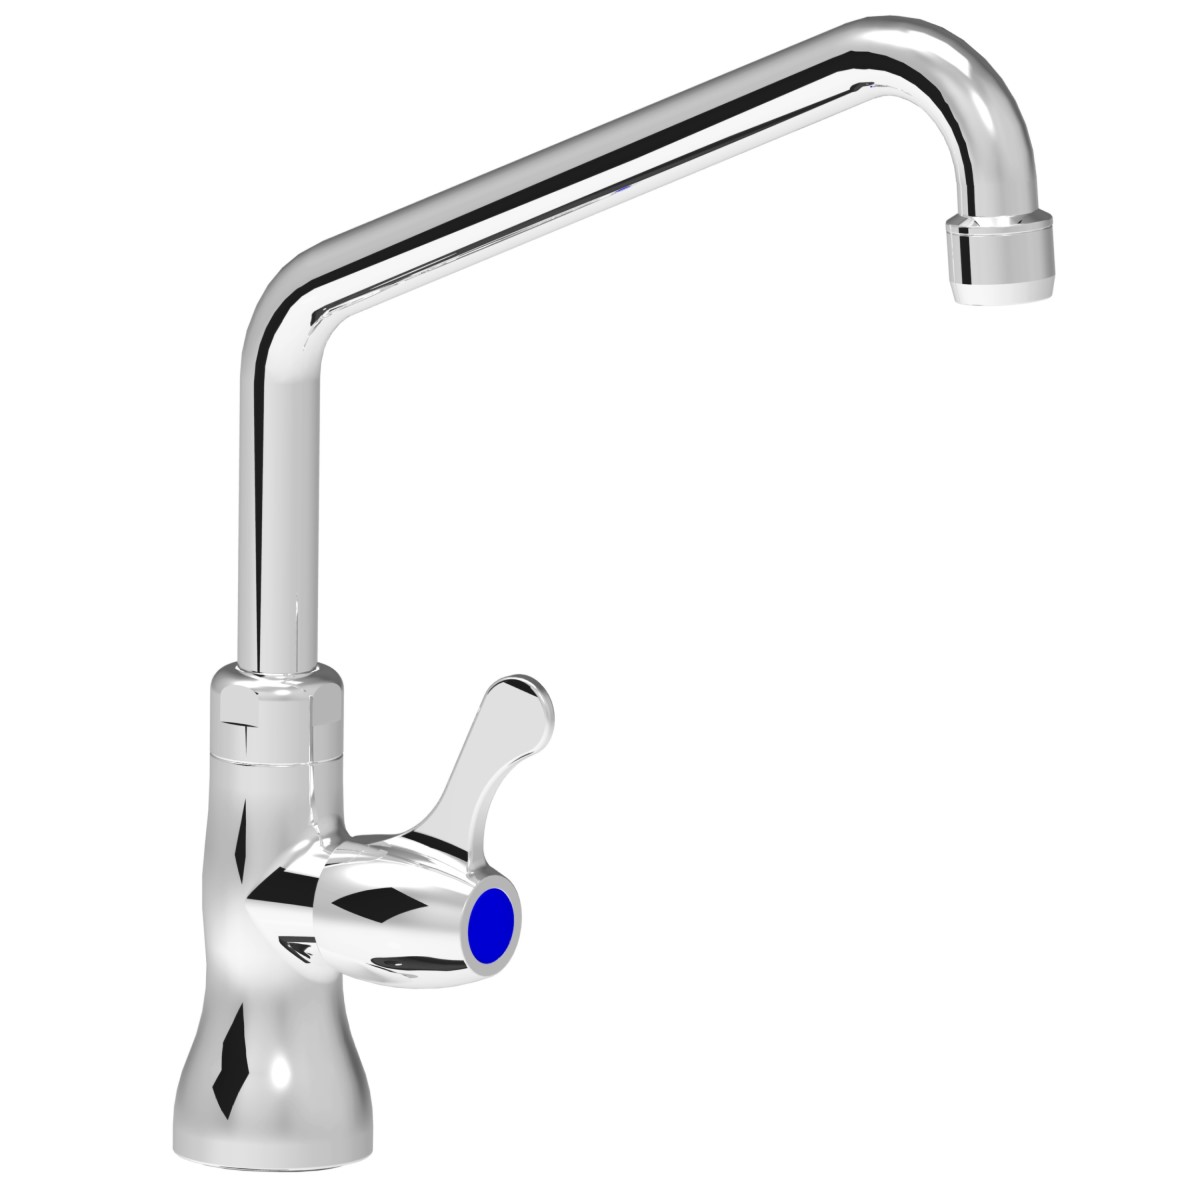 Vertical tap with 1/4 turn handles